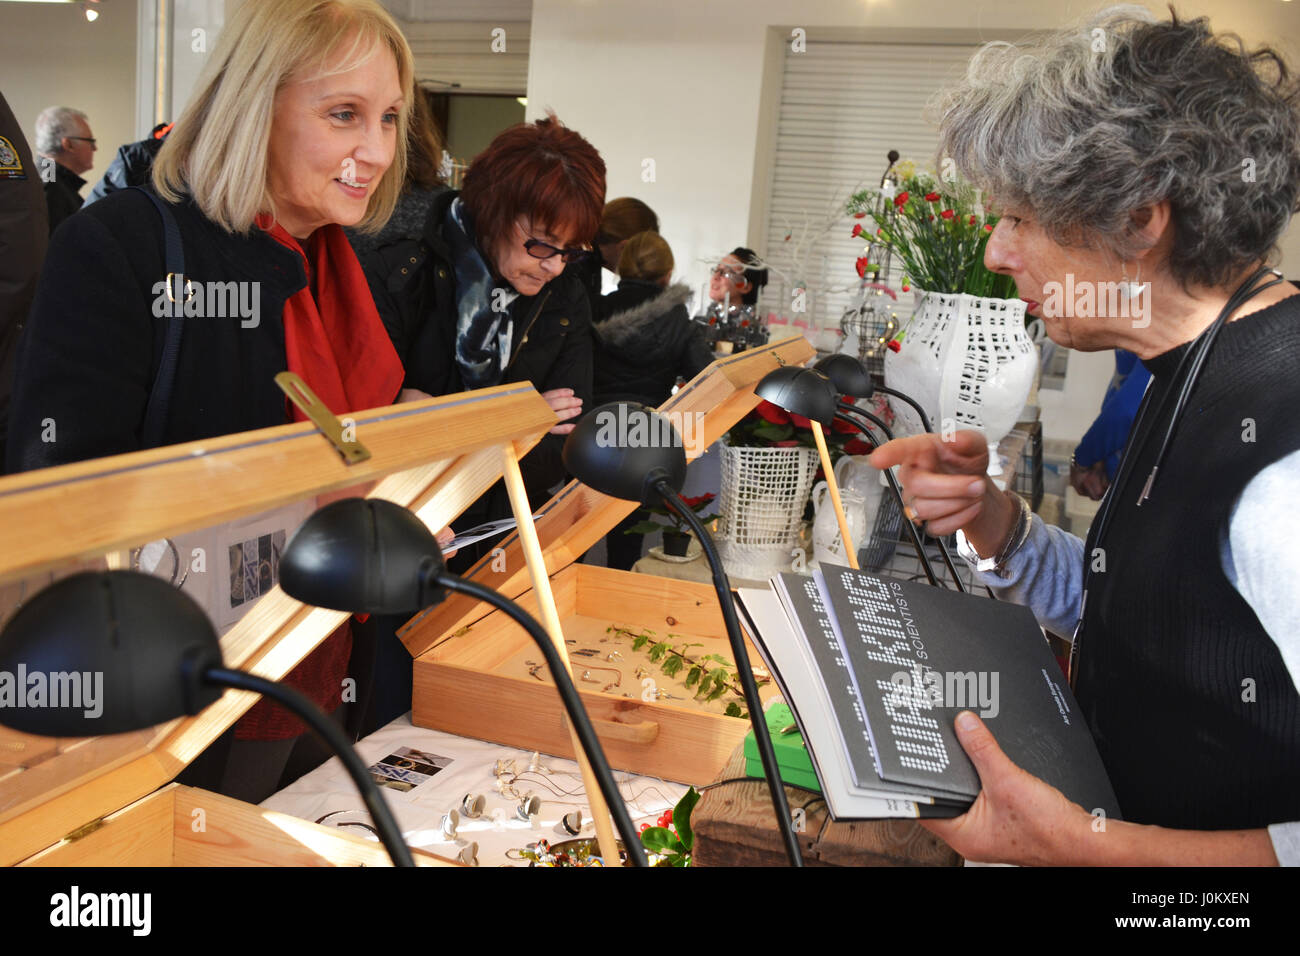 Jane Brophy (Lib Dem Greater Manchester Mayoral Candidate) visits Little Northern Contemporary Craft Fair in Altrincham & speaks with Dr Sarah O'Hana Stock Photo